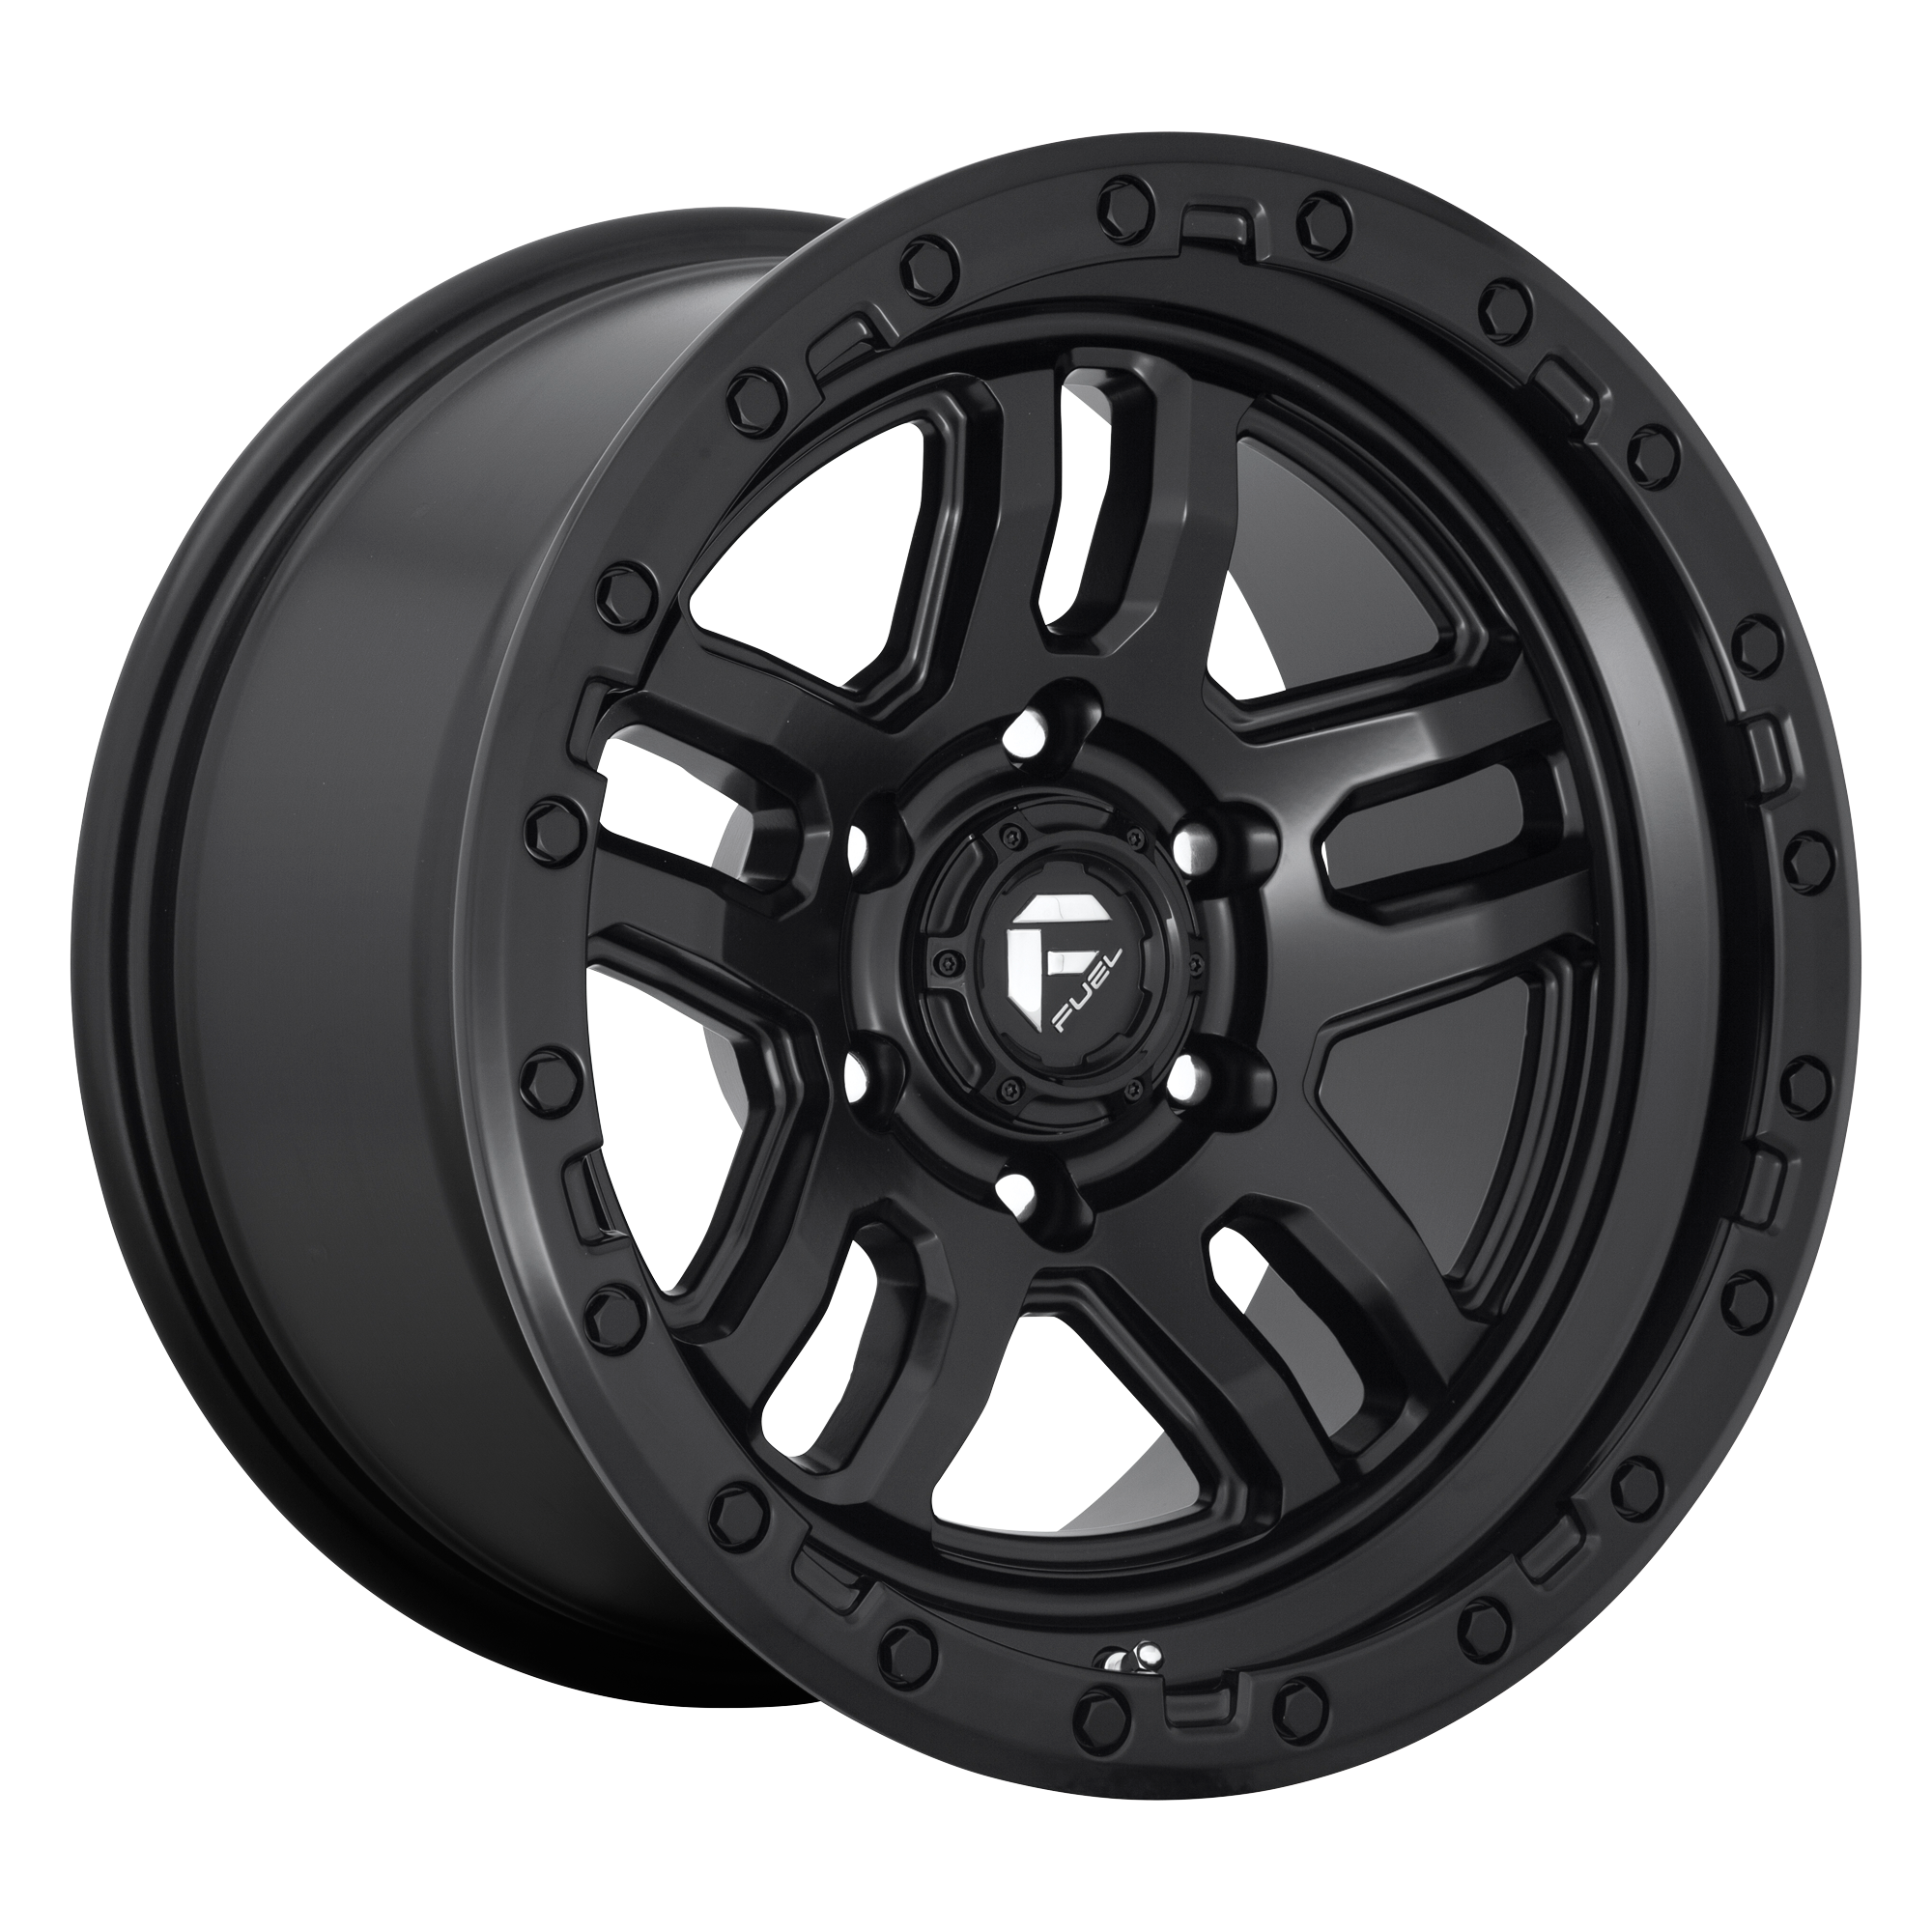 AMMO 20x9 6x135.00 MATTE BLACK (20 mm) - Tires and Engine Performance